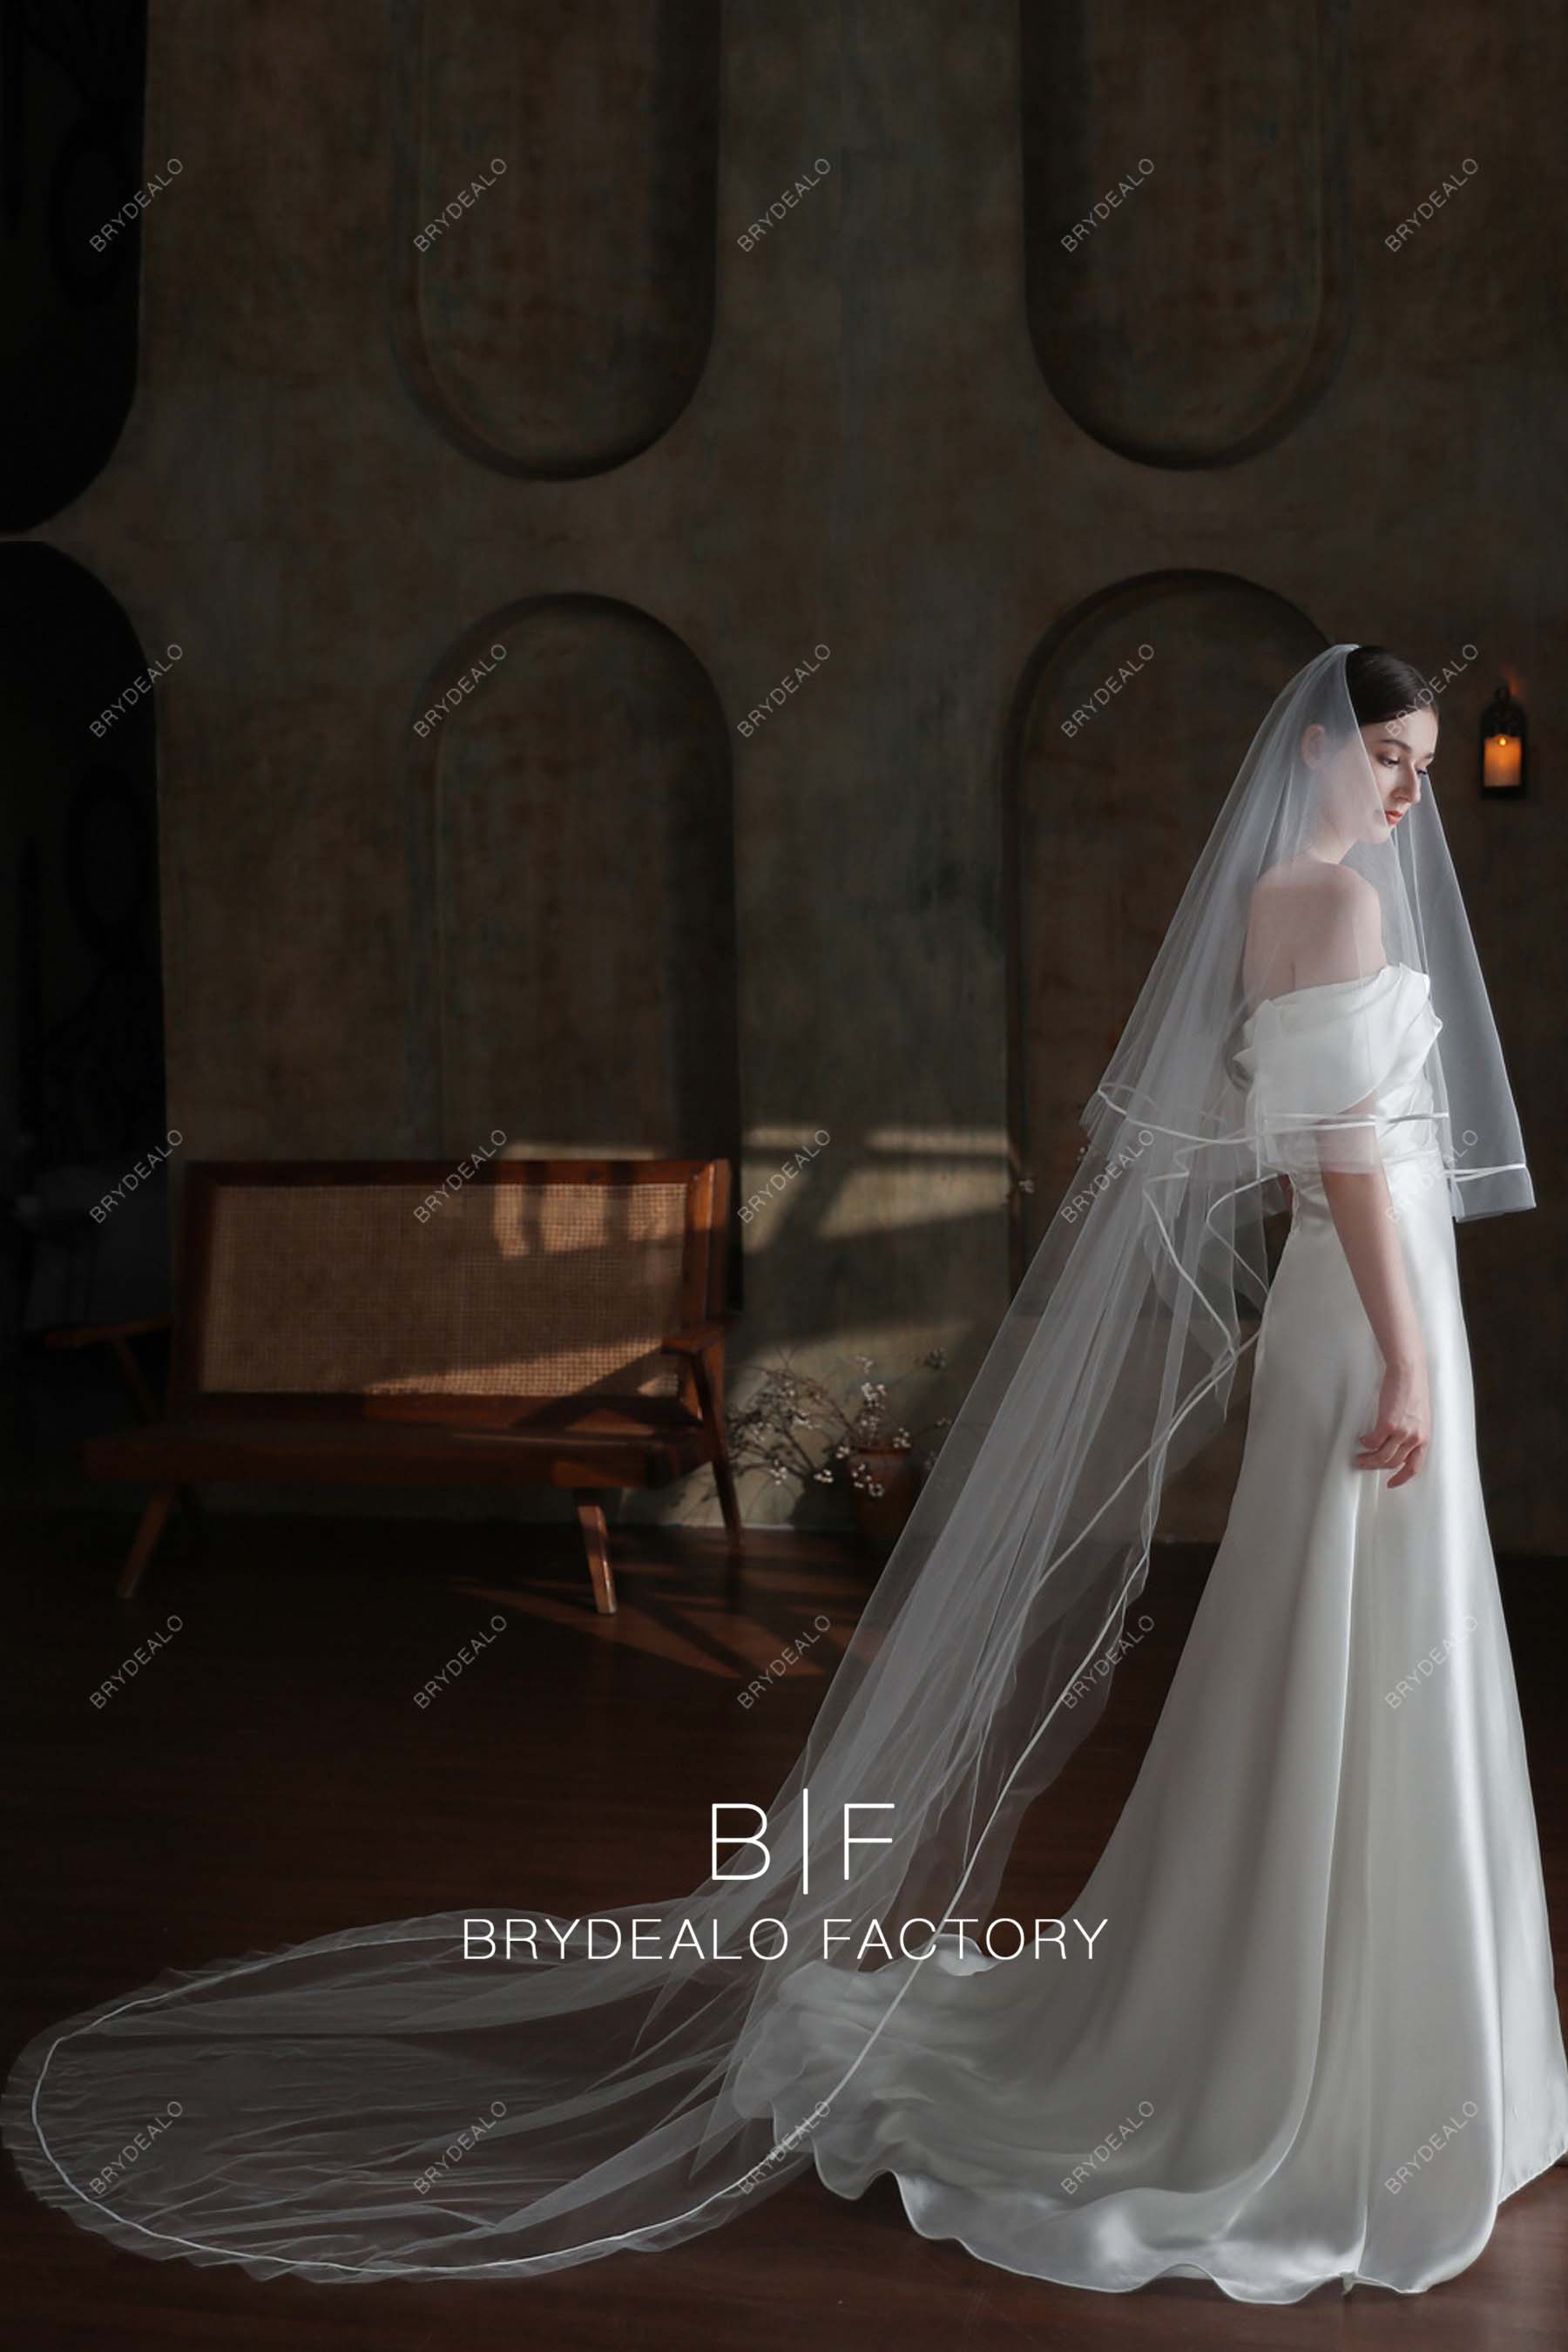 VeroBride 2-Tier Satin Ribbon Wedding Veil Light Ivory (in The Photos) / Grand Royal - 150/30 Inches